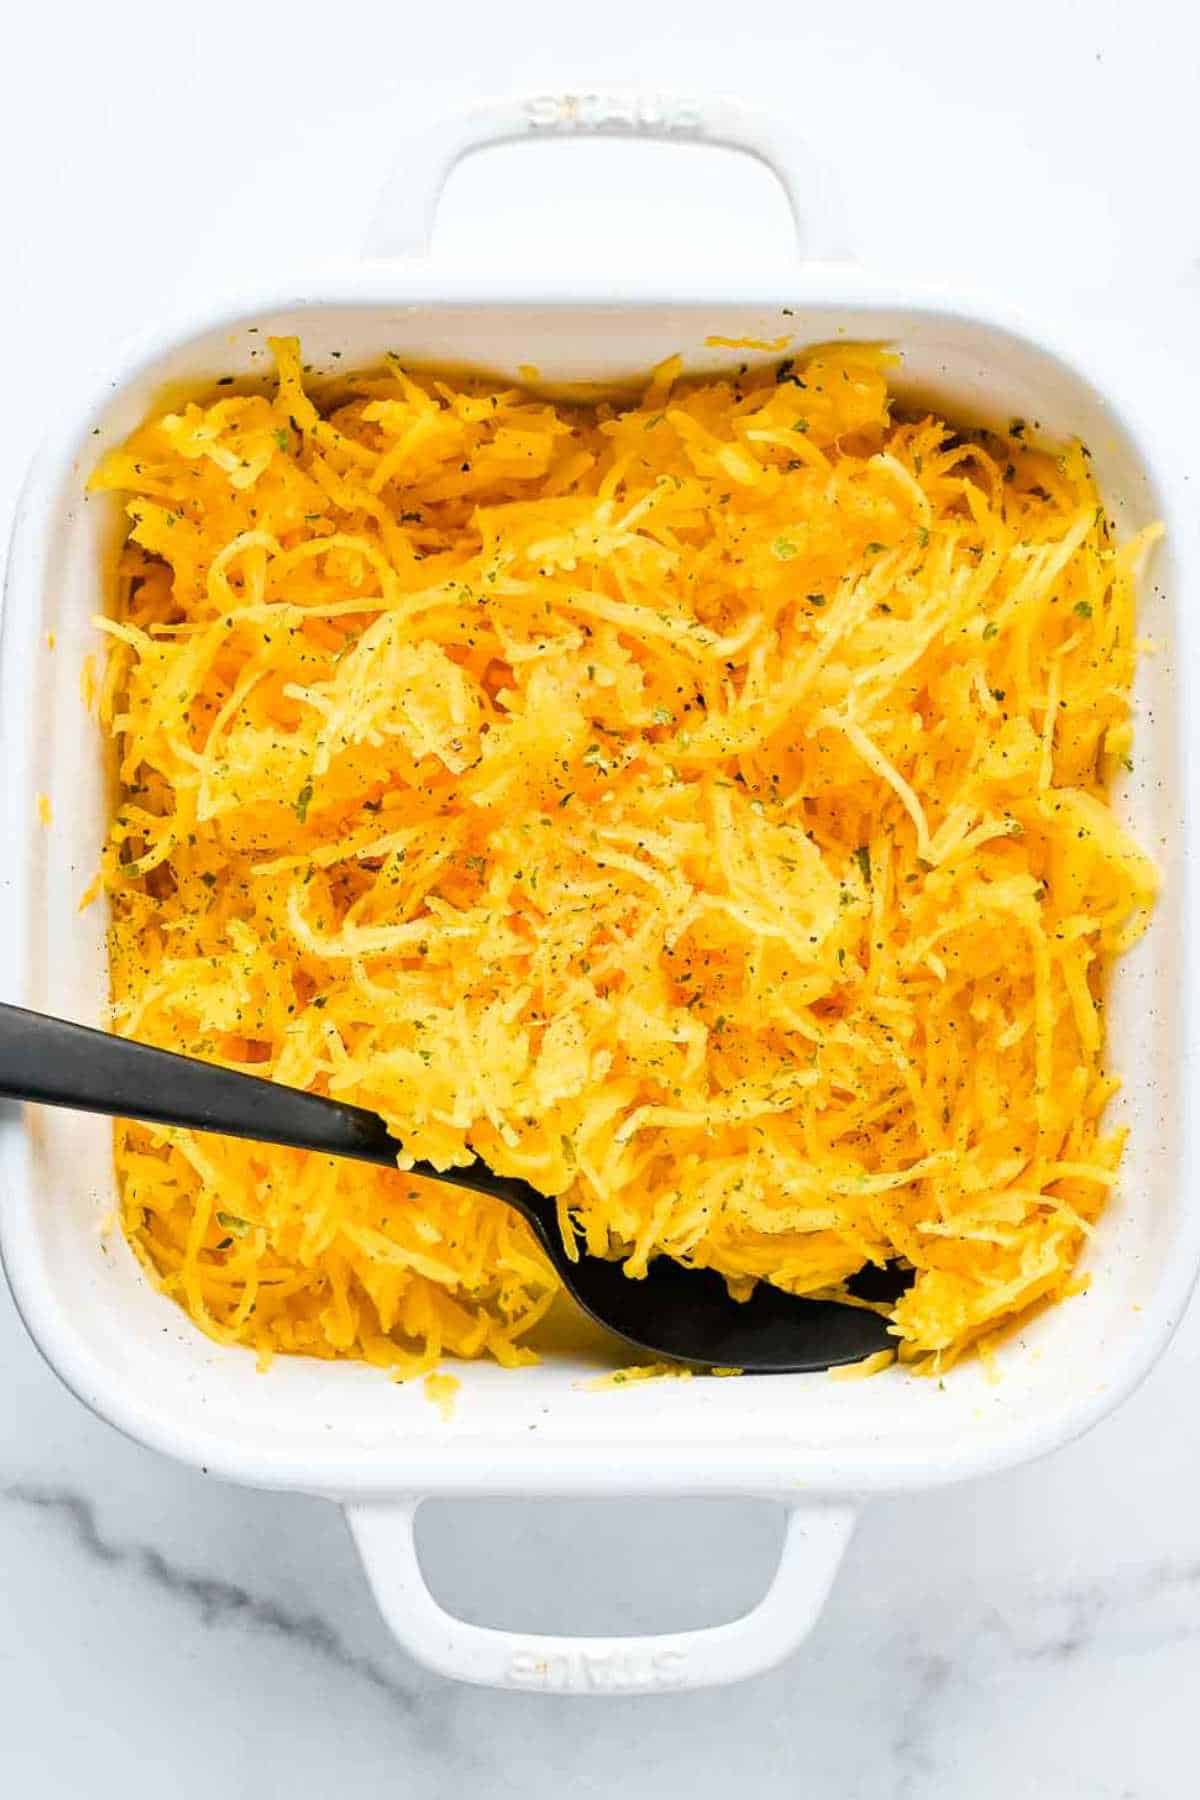 prepared air fryer spaghetti squash in a white casserole dish with a black spoon topped with parsley and pepper.